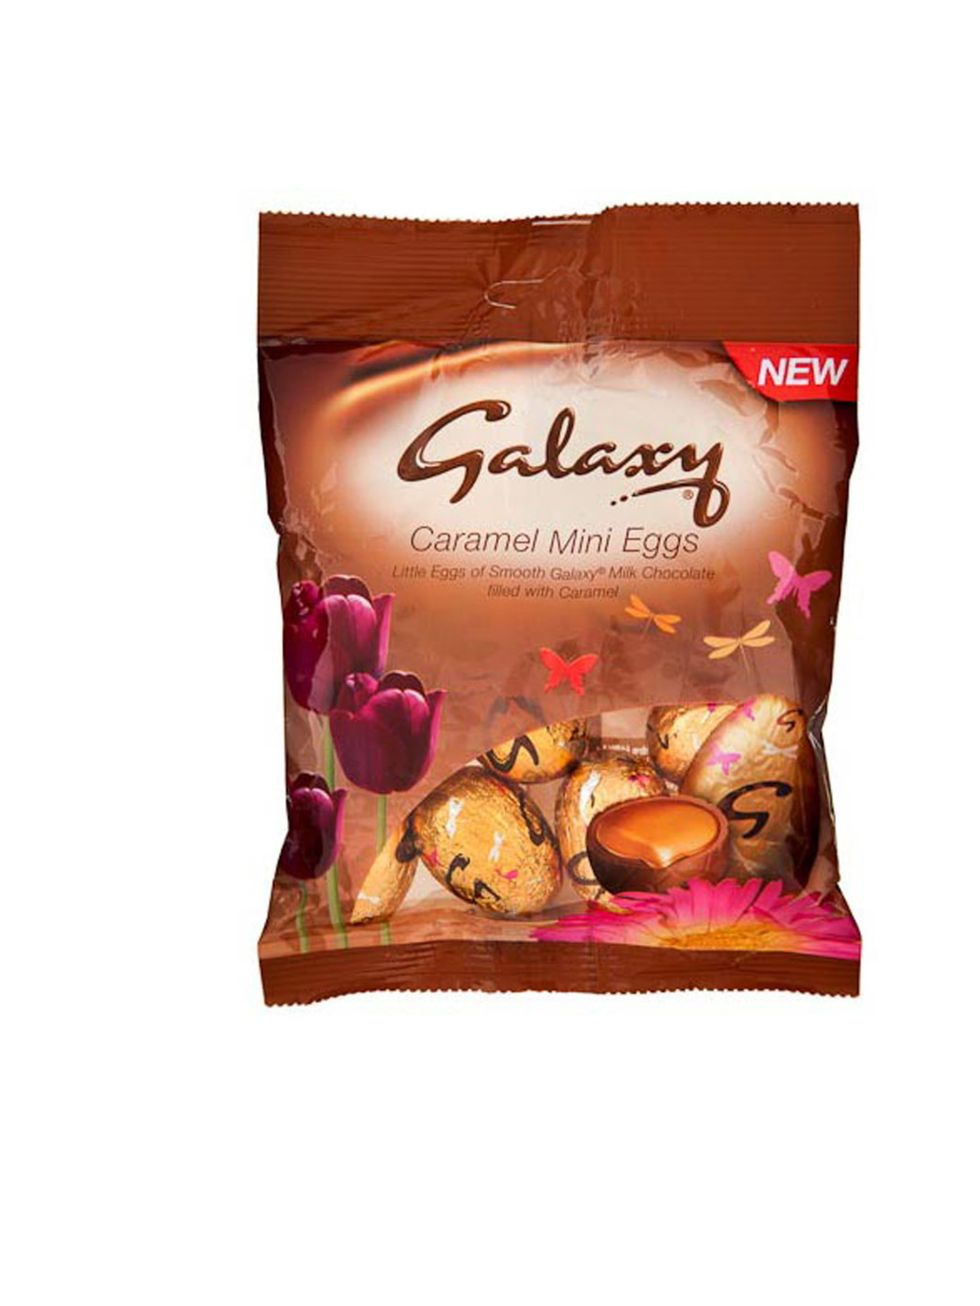 <p><strong>Treat: <a href="http://www.galaxychocolate.co.uk/agecheck/default.aspx?r=http://www.galaxychocolate.co.uk/default.aspx">Galaxy Caramel Mini Eggs</a></strong><strong> Calories: 484 Calories</strong><strong> Activity: Shopping</strong><strong> Ti